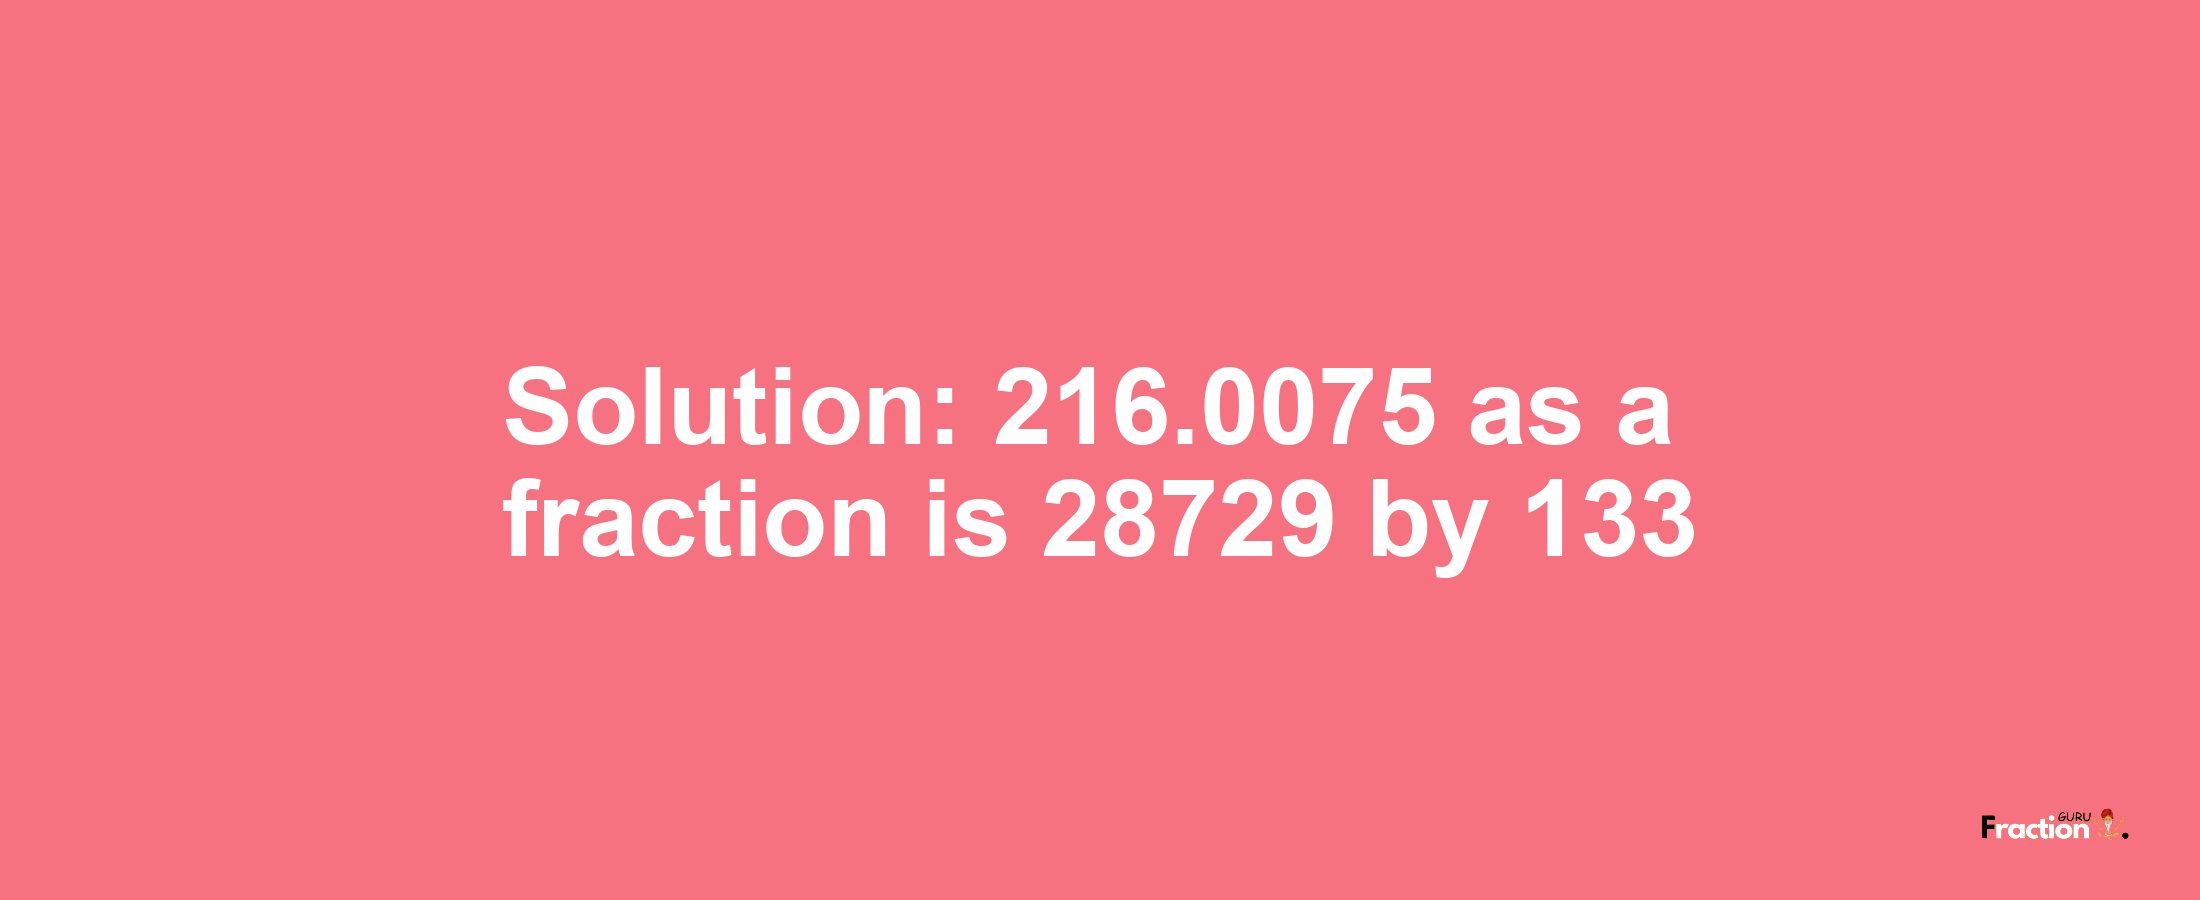 Solution:216.0075 as a fraction is 28729/133